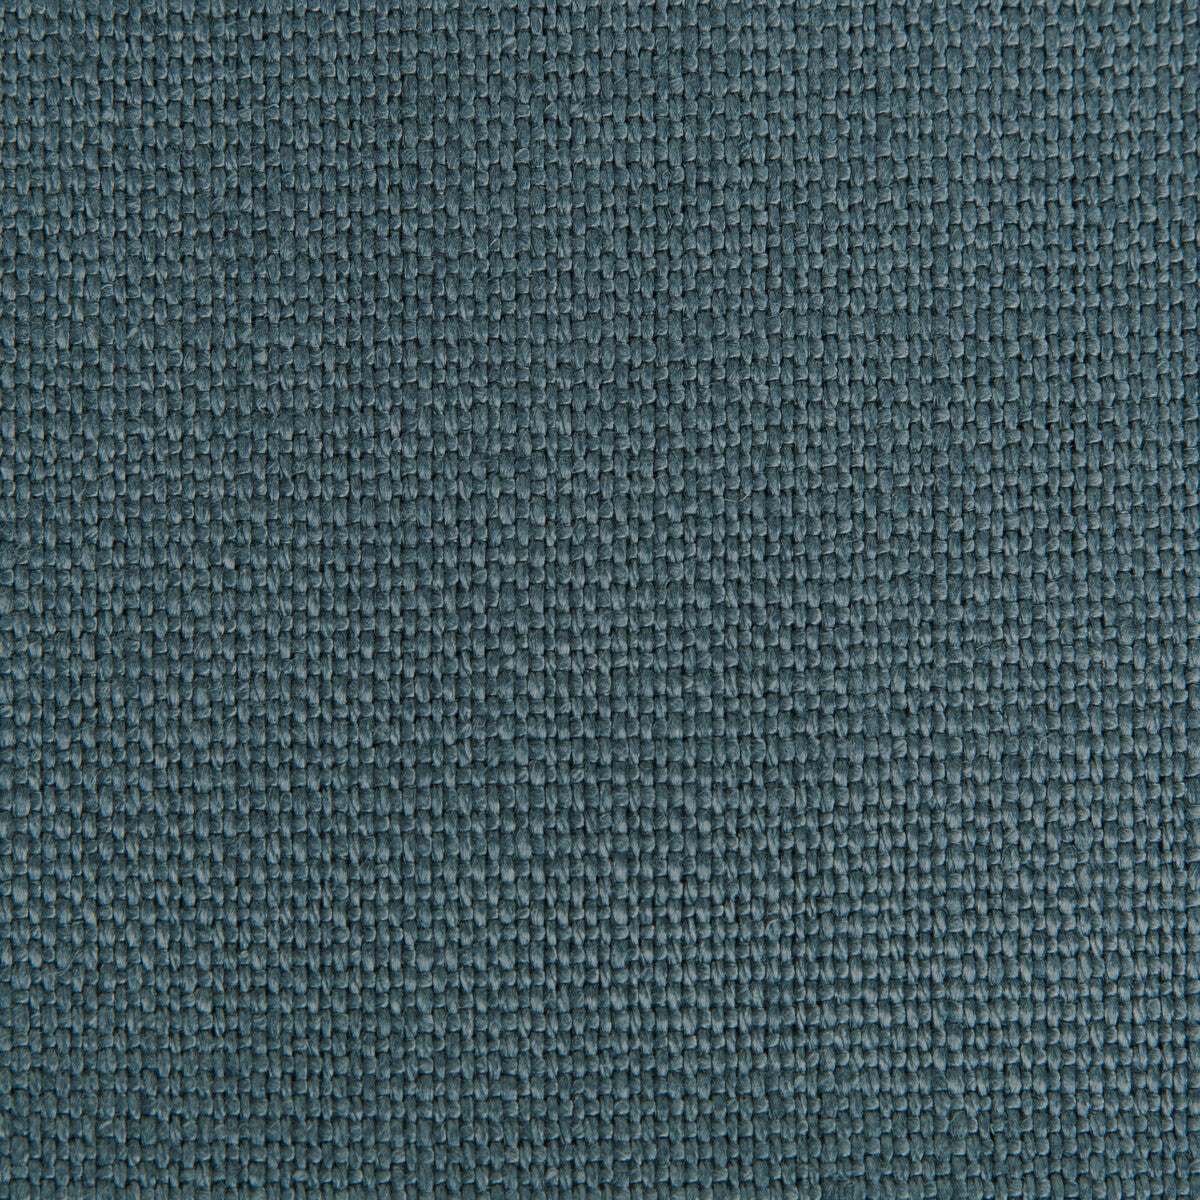 Stone Harbor fabric in ink color - pattern 27591.505.0 - by Kravet Basics